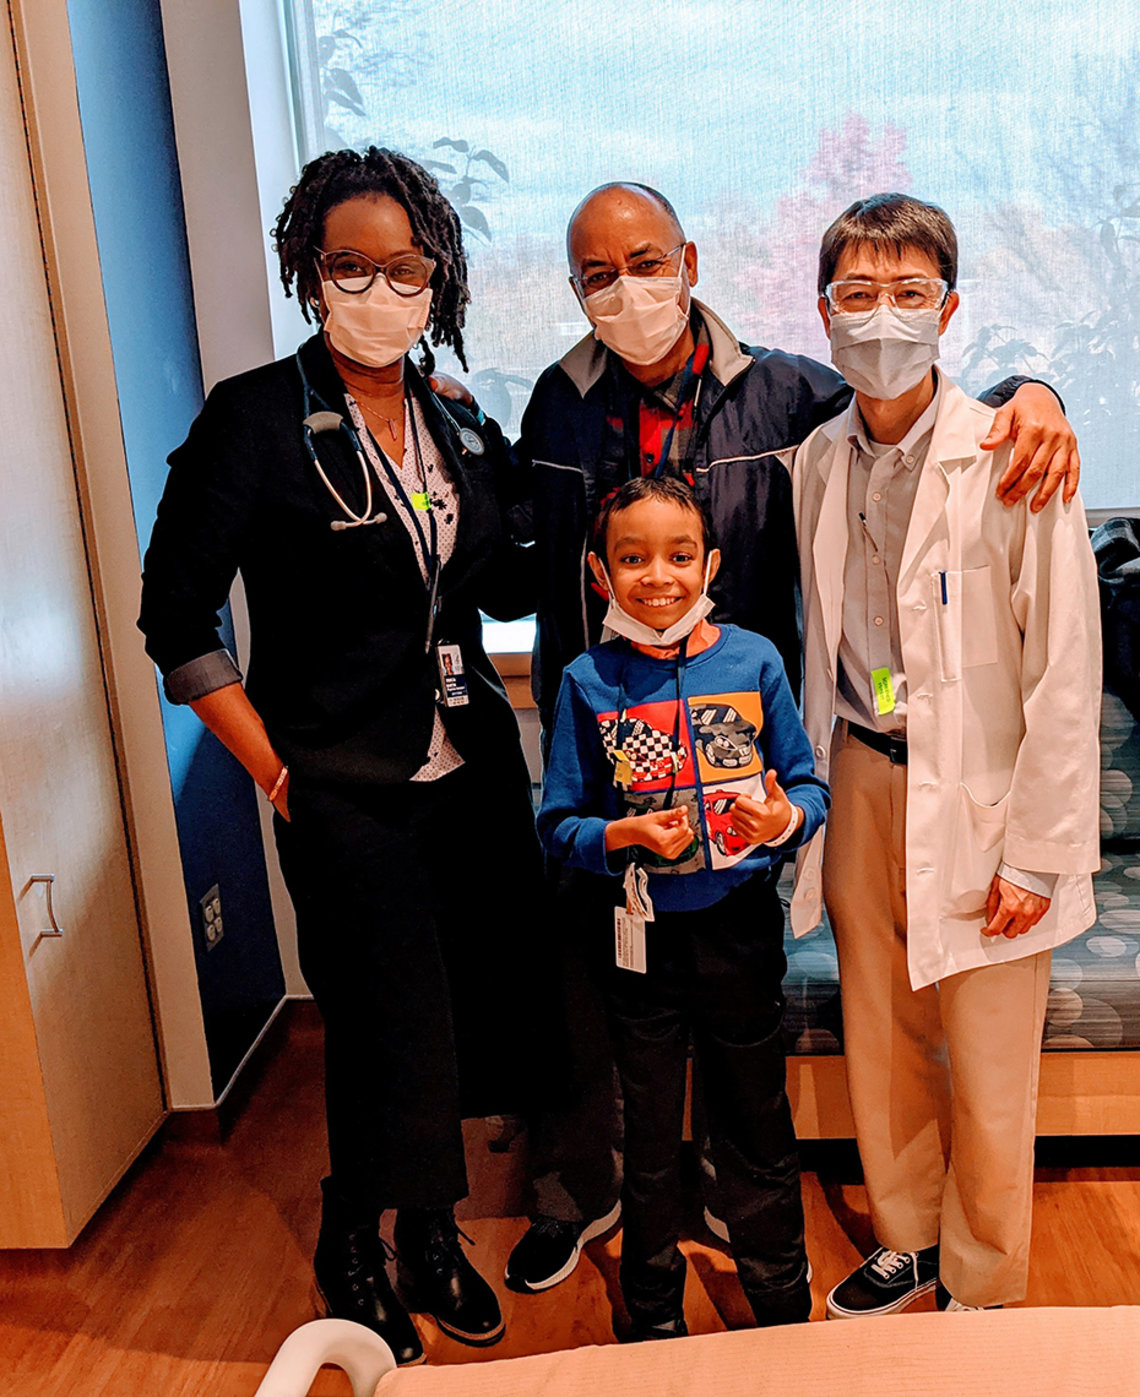 Caesar and his father pose with clinical staff--all masked, except Caesar whose mask is pulled down to reveal a wide smile. Many multi-colored leaves are seen through window behind them.